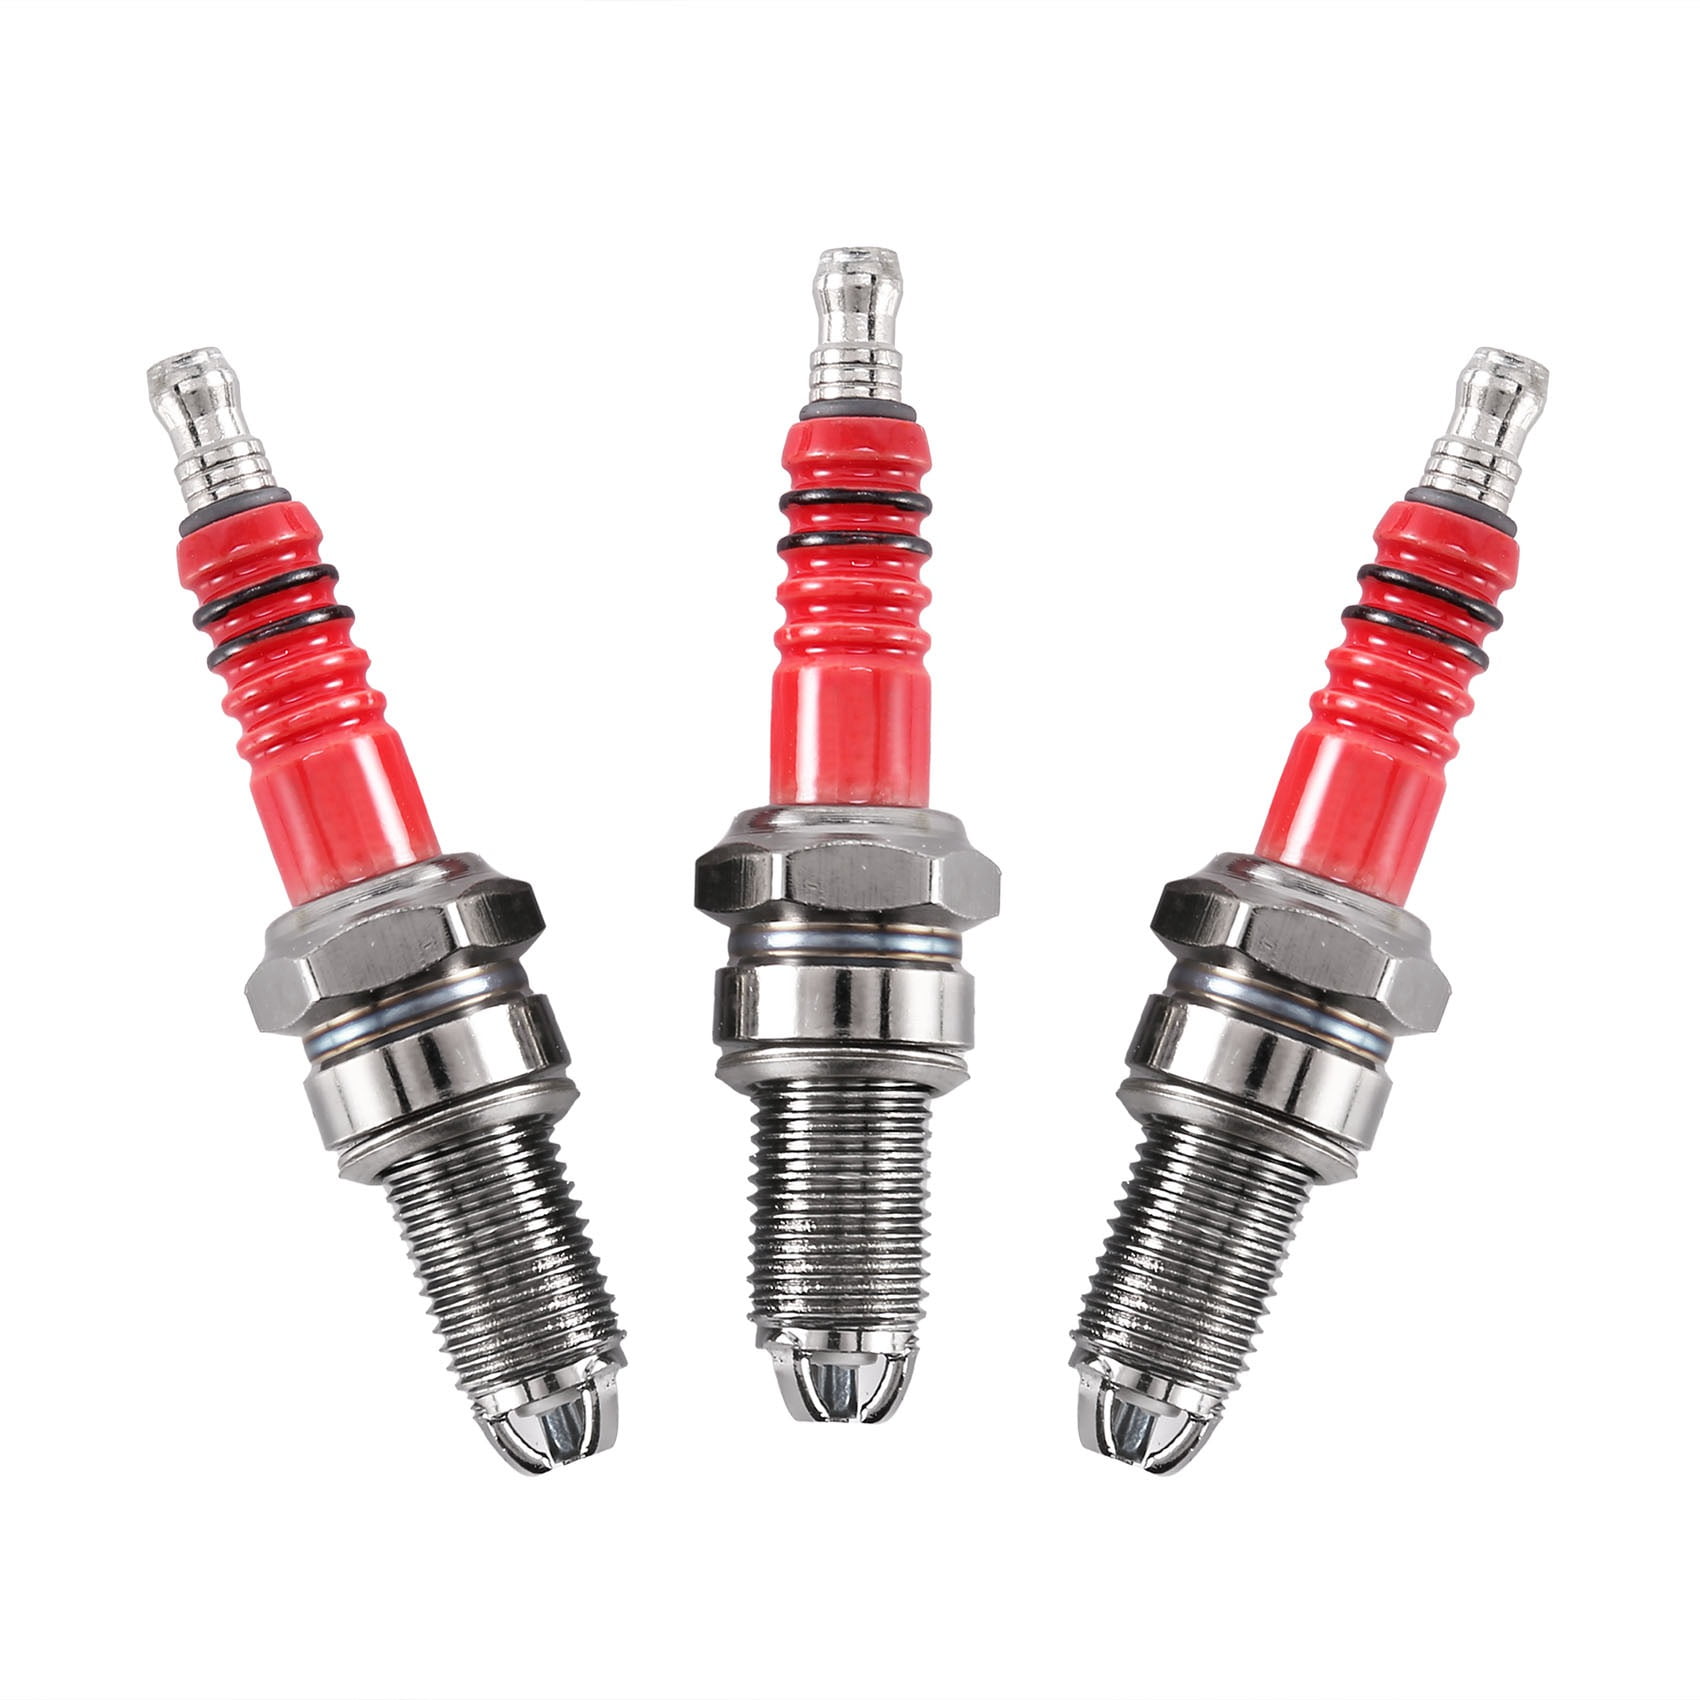 Racing with 3 Electrode for CG 125 150 200cc CF250 Motorcycle Scooter TV Quads YeBetter 3pcs D8TC 3 Electrode 